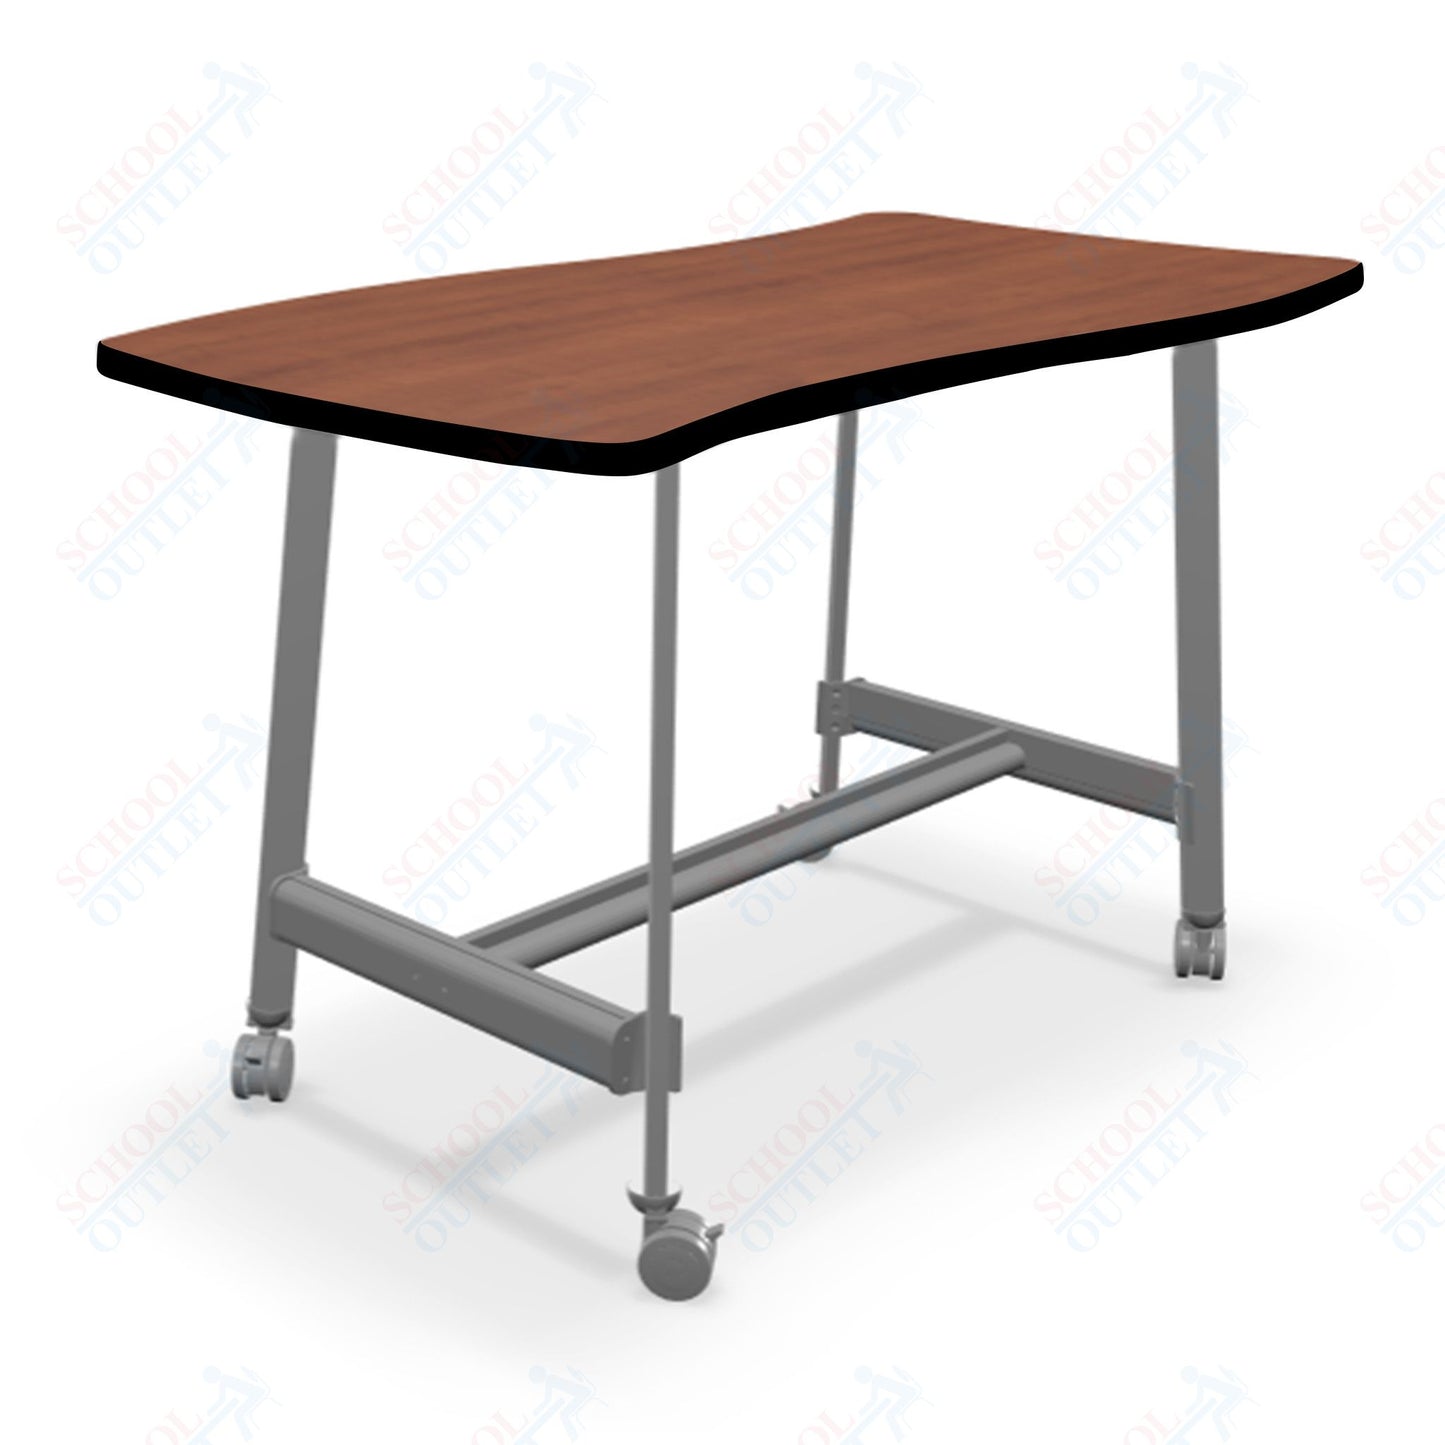 Mooreco Akt Table – Wavy Rectangle, Laminate Top, Fixed Height Available in 29"H, 36"H, or 42"H